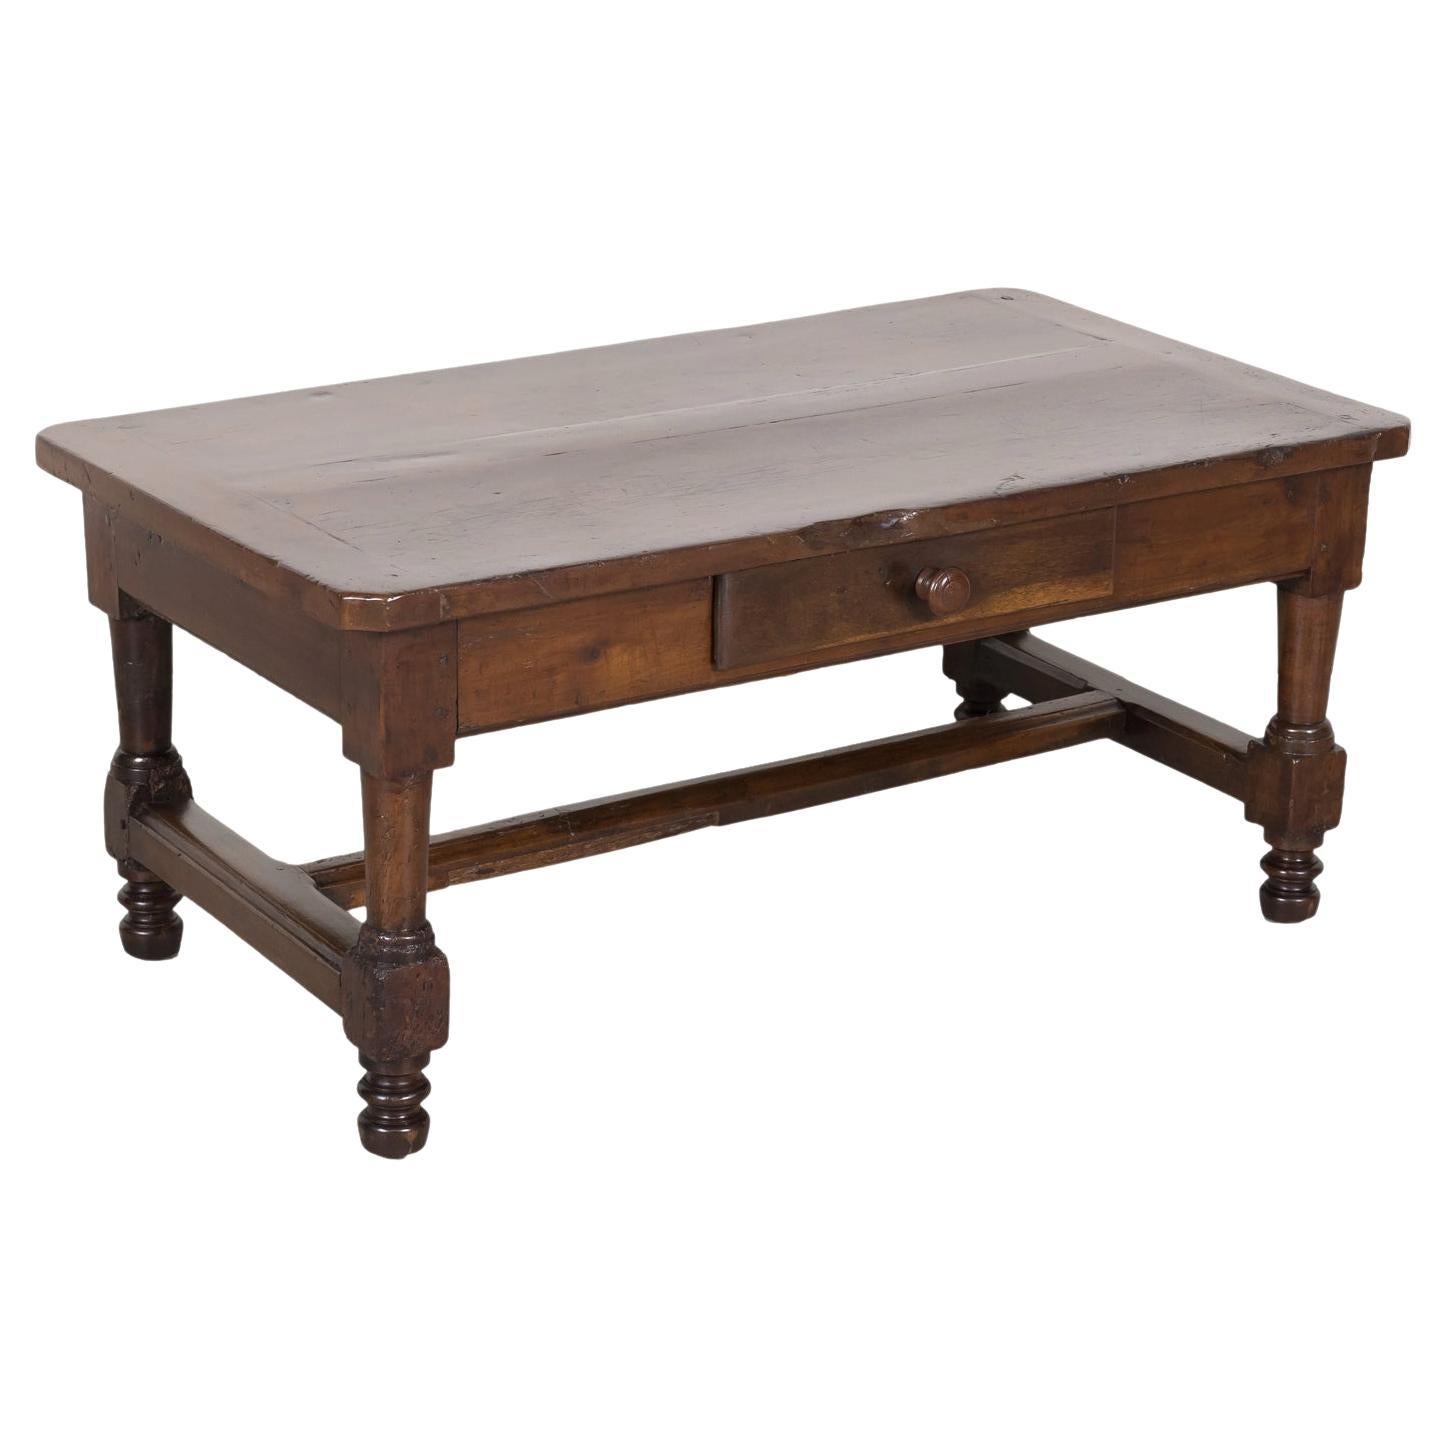 18th Century French Country Solid Walnut Coffee Table with Drawer